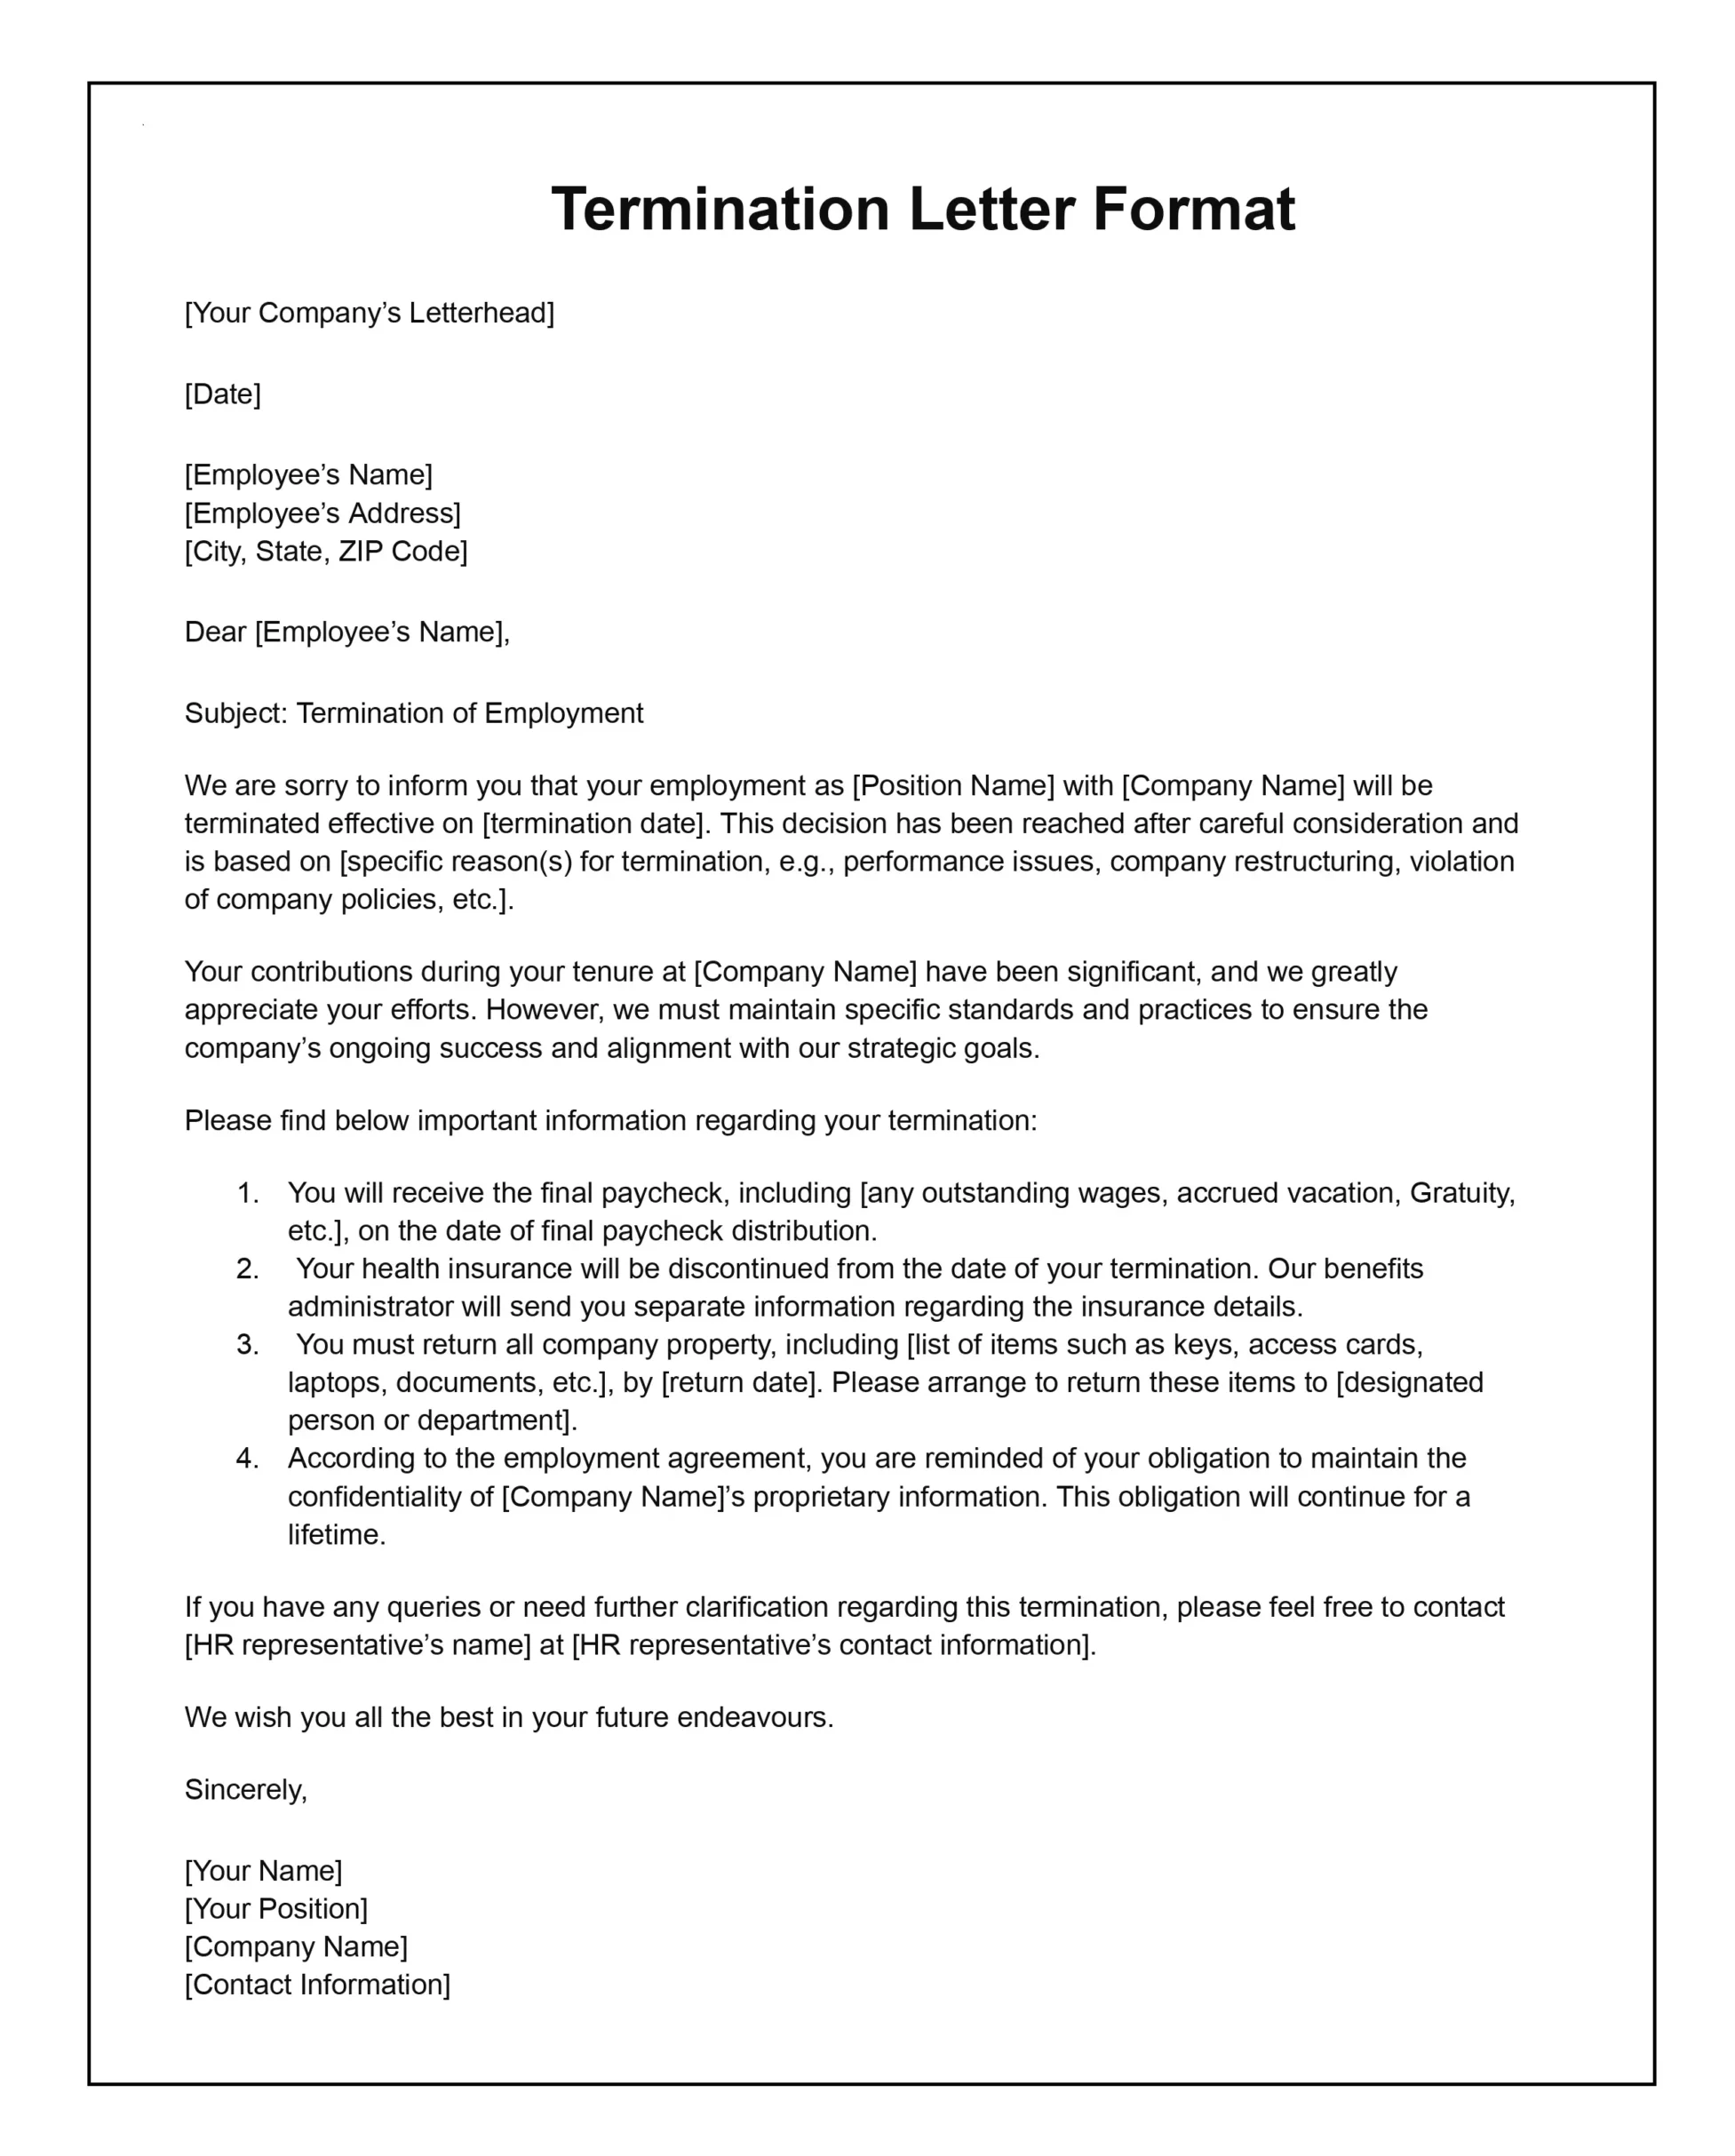 Termination letter format in word